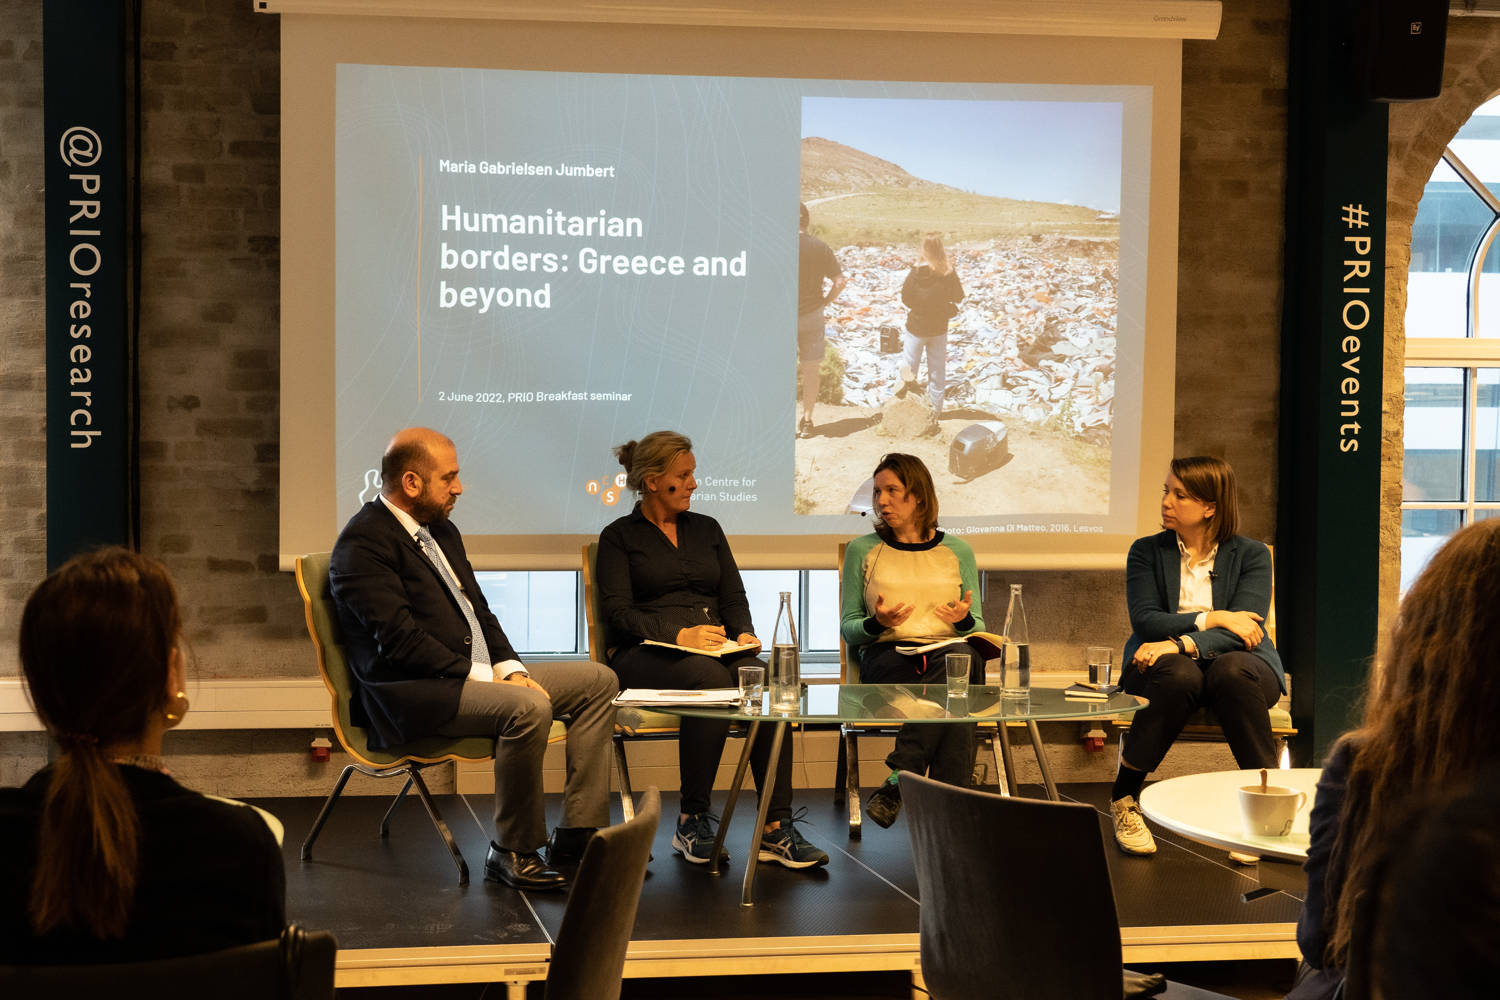 From left to right: Manos Logothetis, Trude Jacobsen, Anna Ratecka, and Maria Gabrielsen Jumbert. Photo: PRIO / Laura Cortes